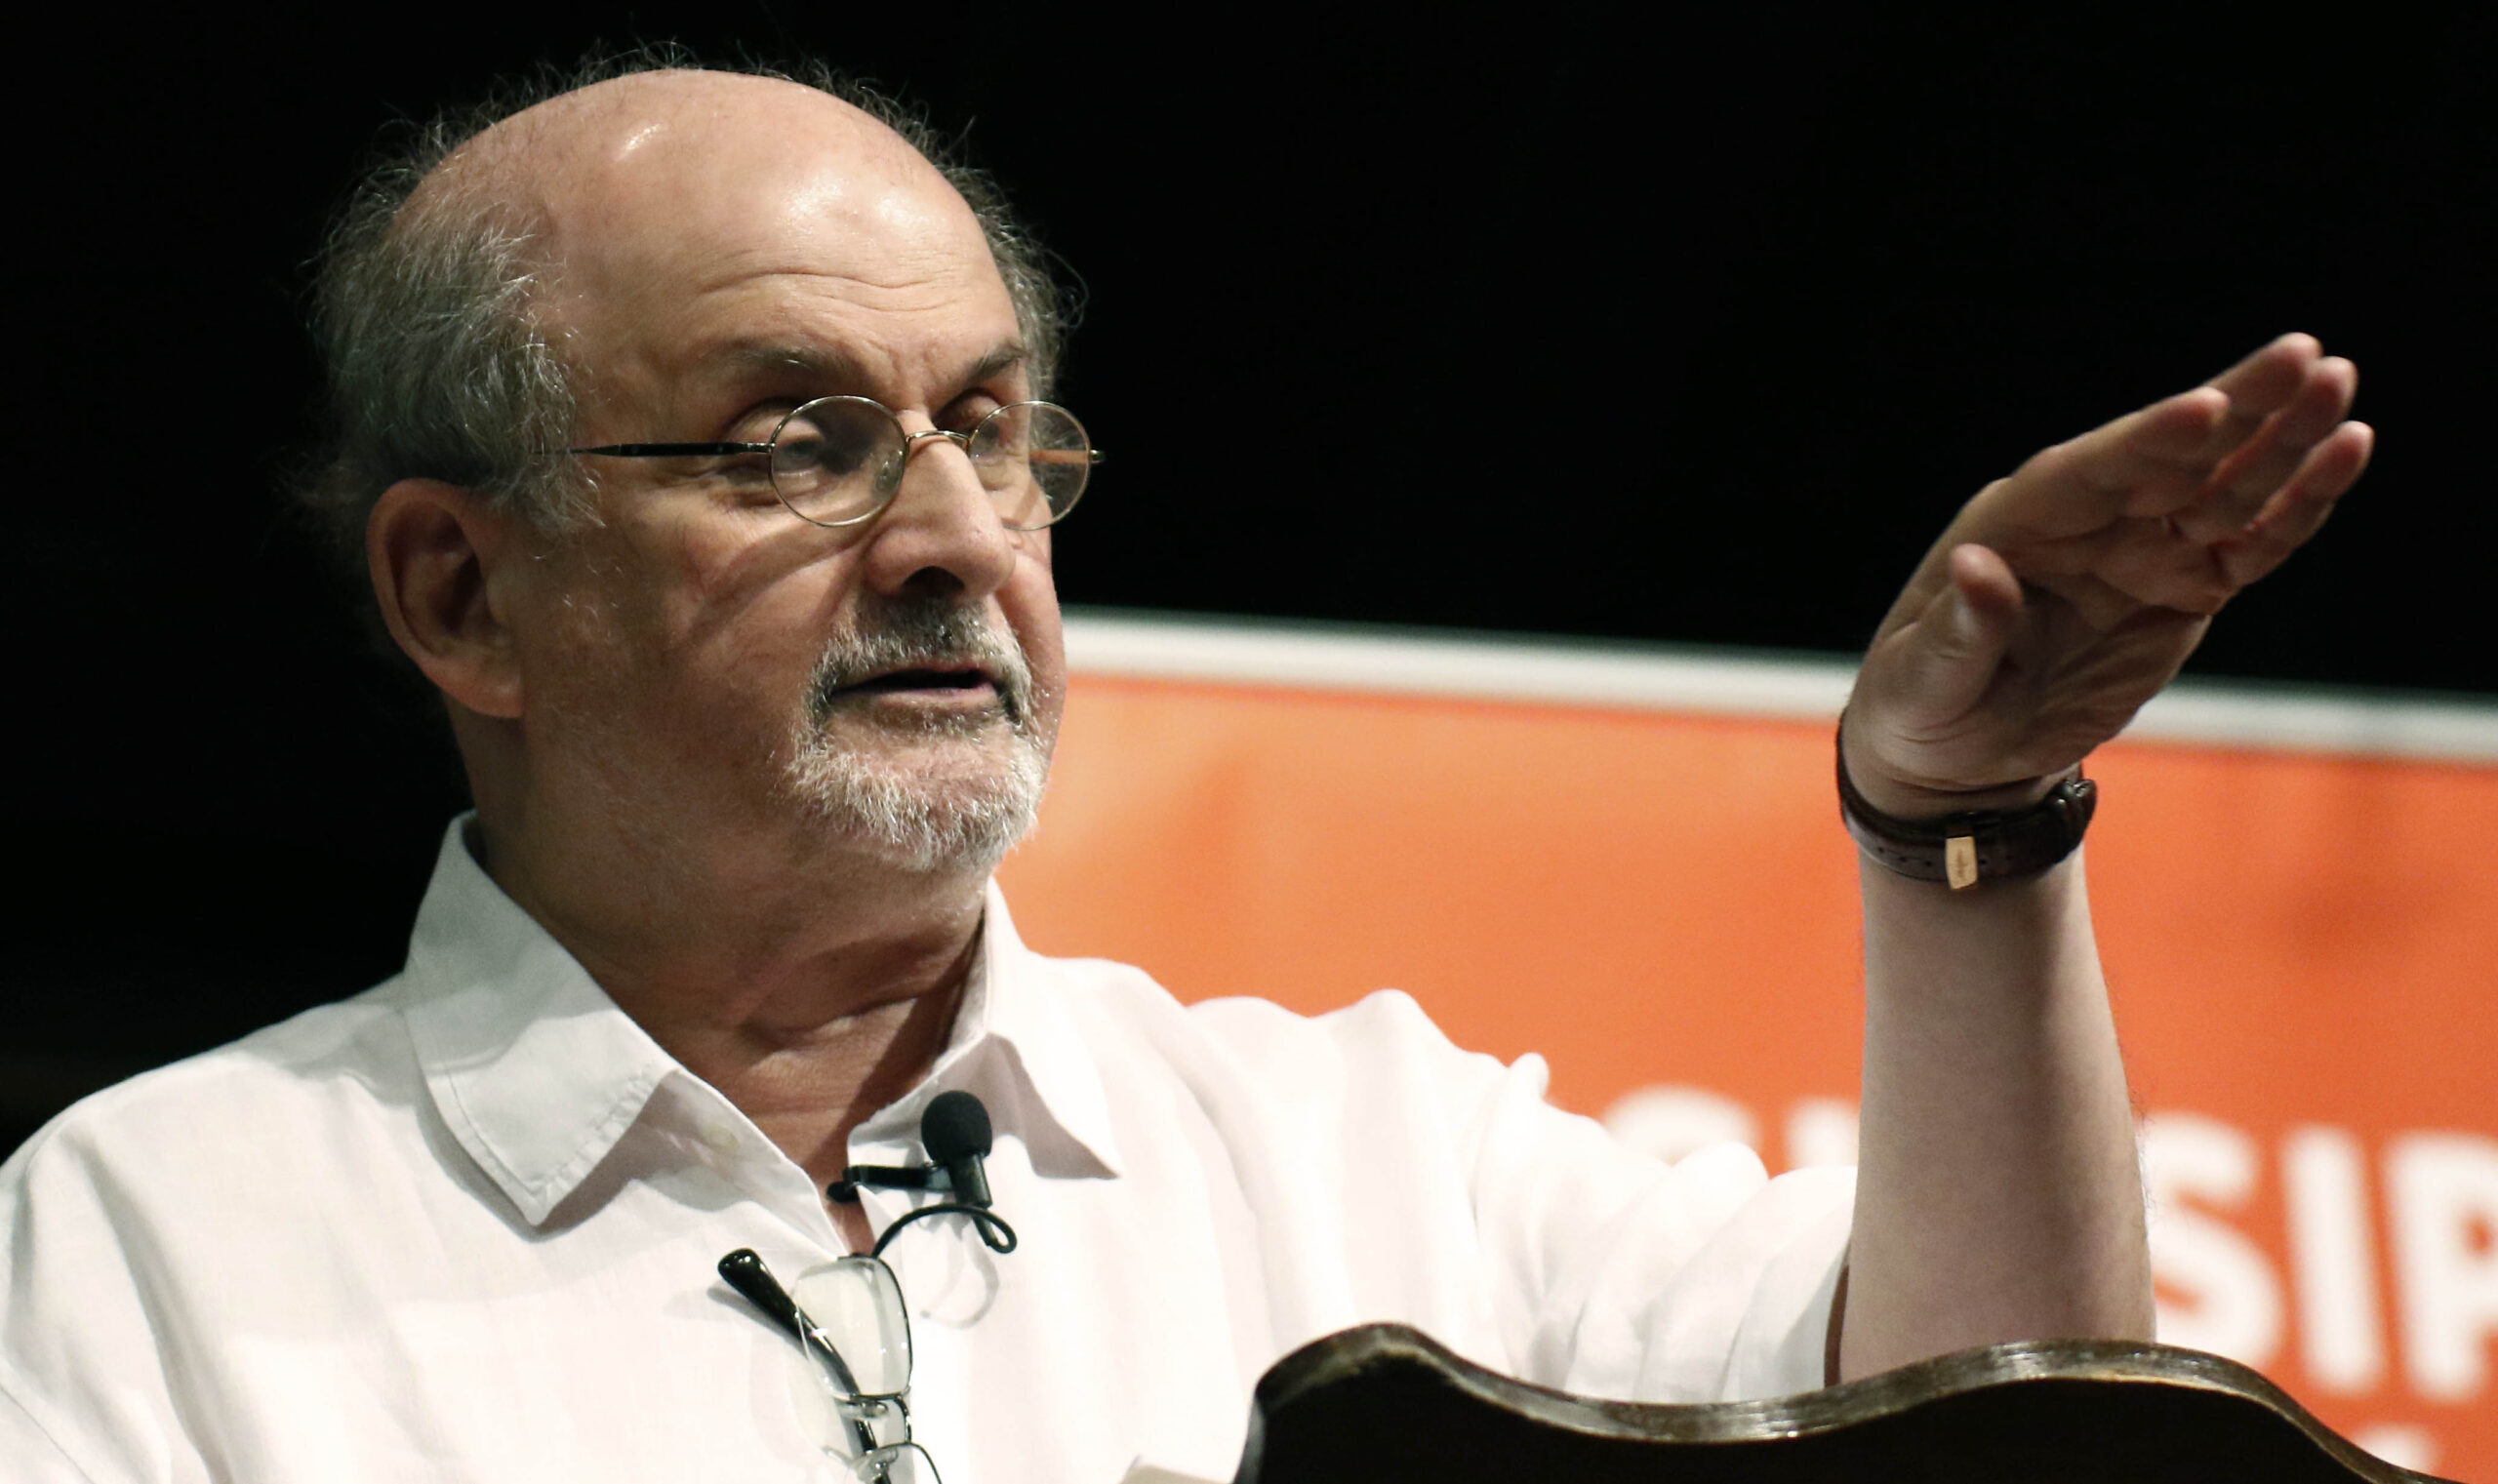 FILE — Author Salman Rushdie talks about the start of his writing career, during the Mississippi Book Festival, in Jackson, Miss., on Aug. 18, 2018. Rushdie, the author whose writing led to death threats from Iran in the 1980s, was attacked Friday while giving a lecture in western New York. (AP Photo/Rogelio V. Solis, File)